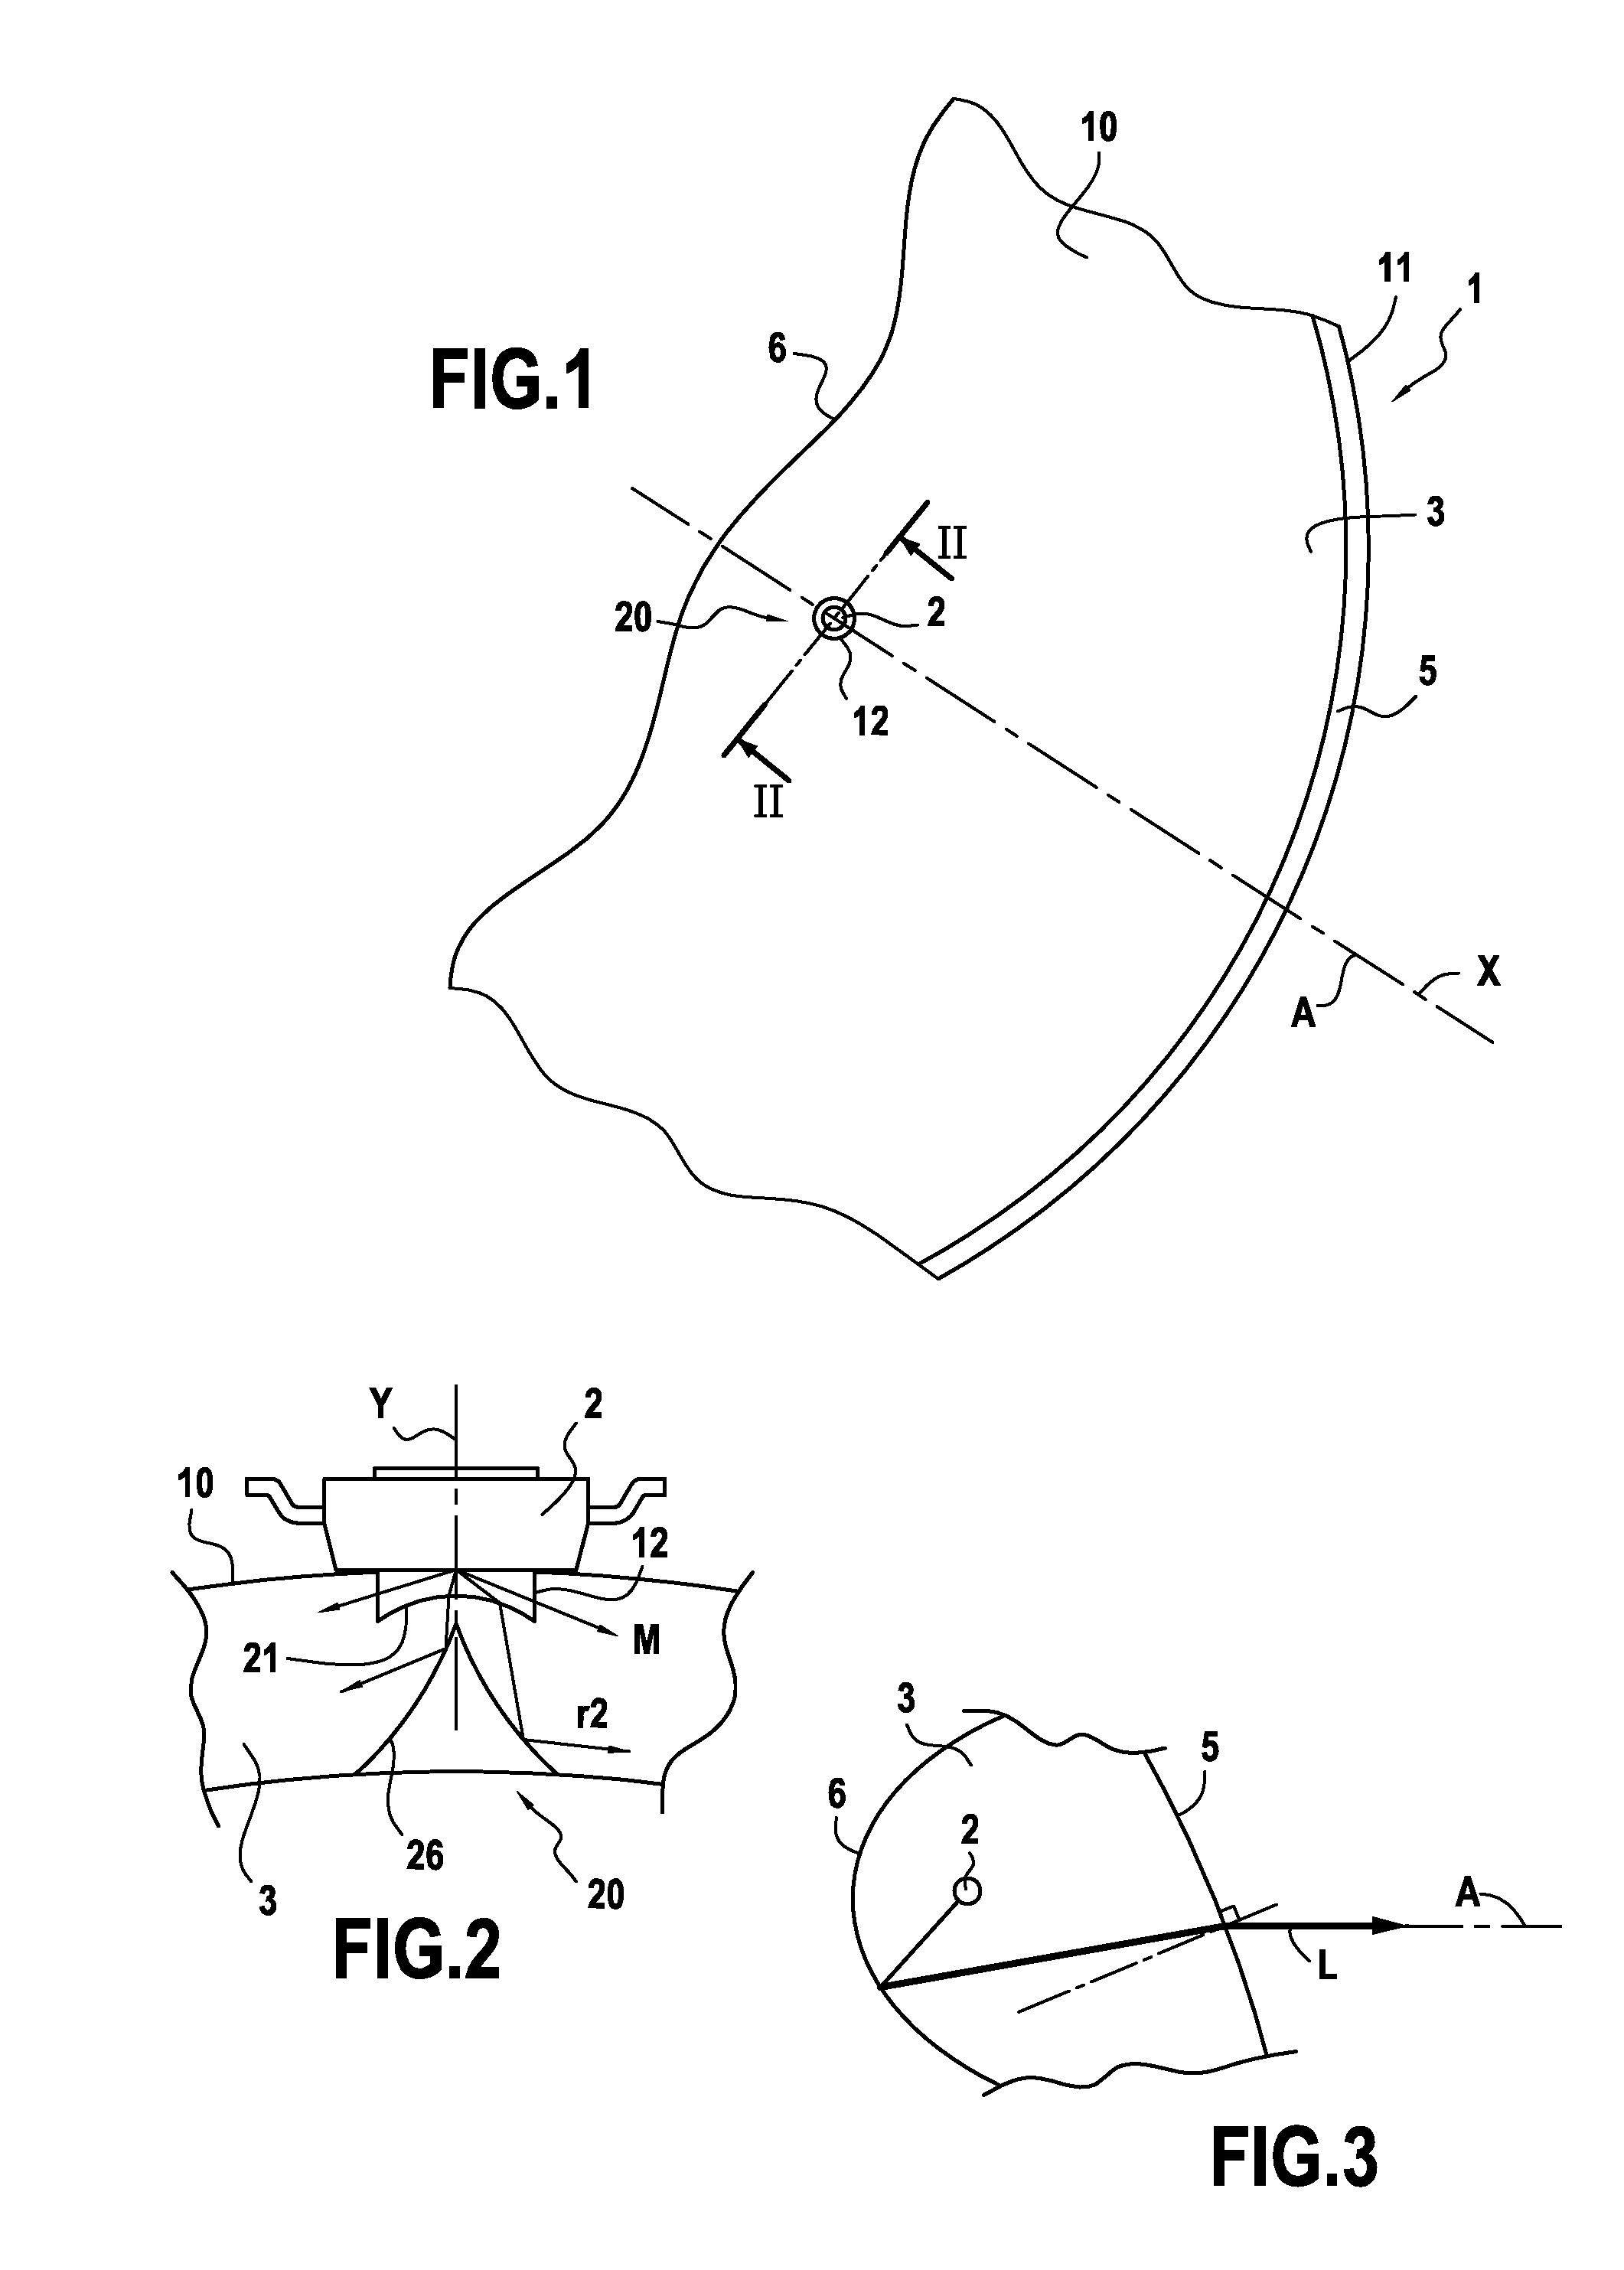 Optical device, in particular for a motor vehicle, such as a lighting or signaling device